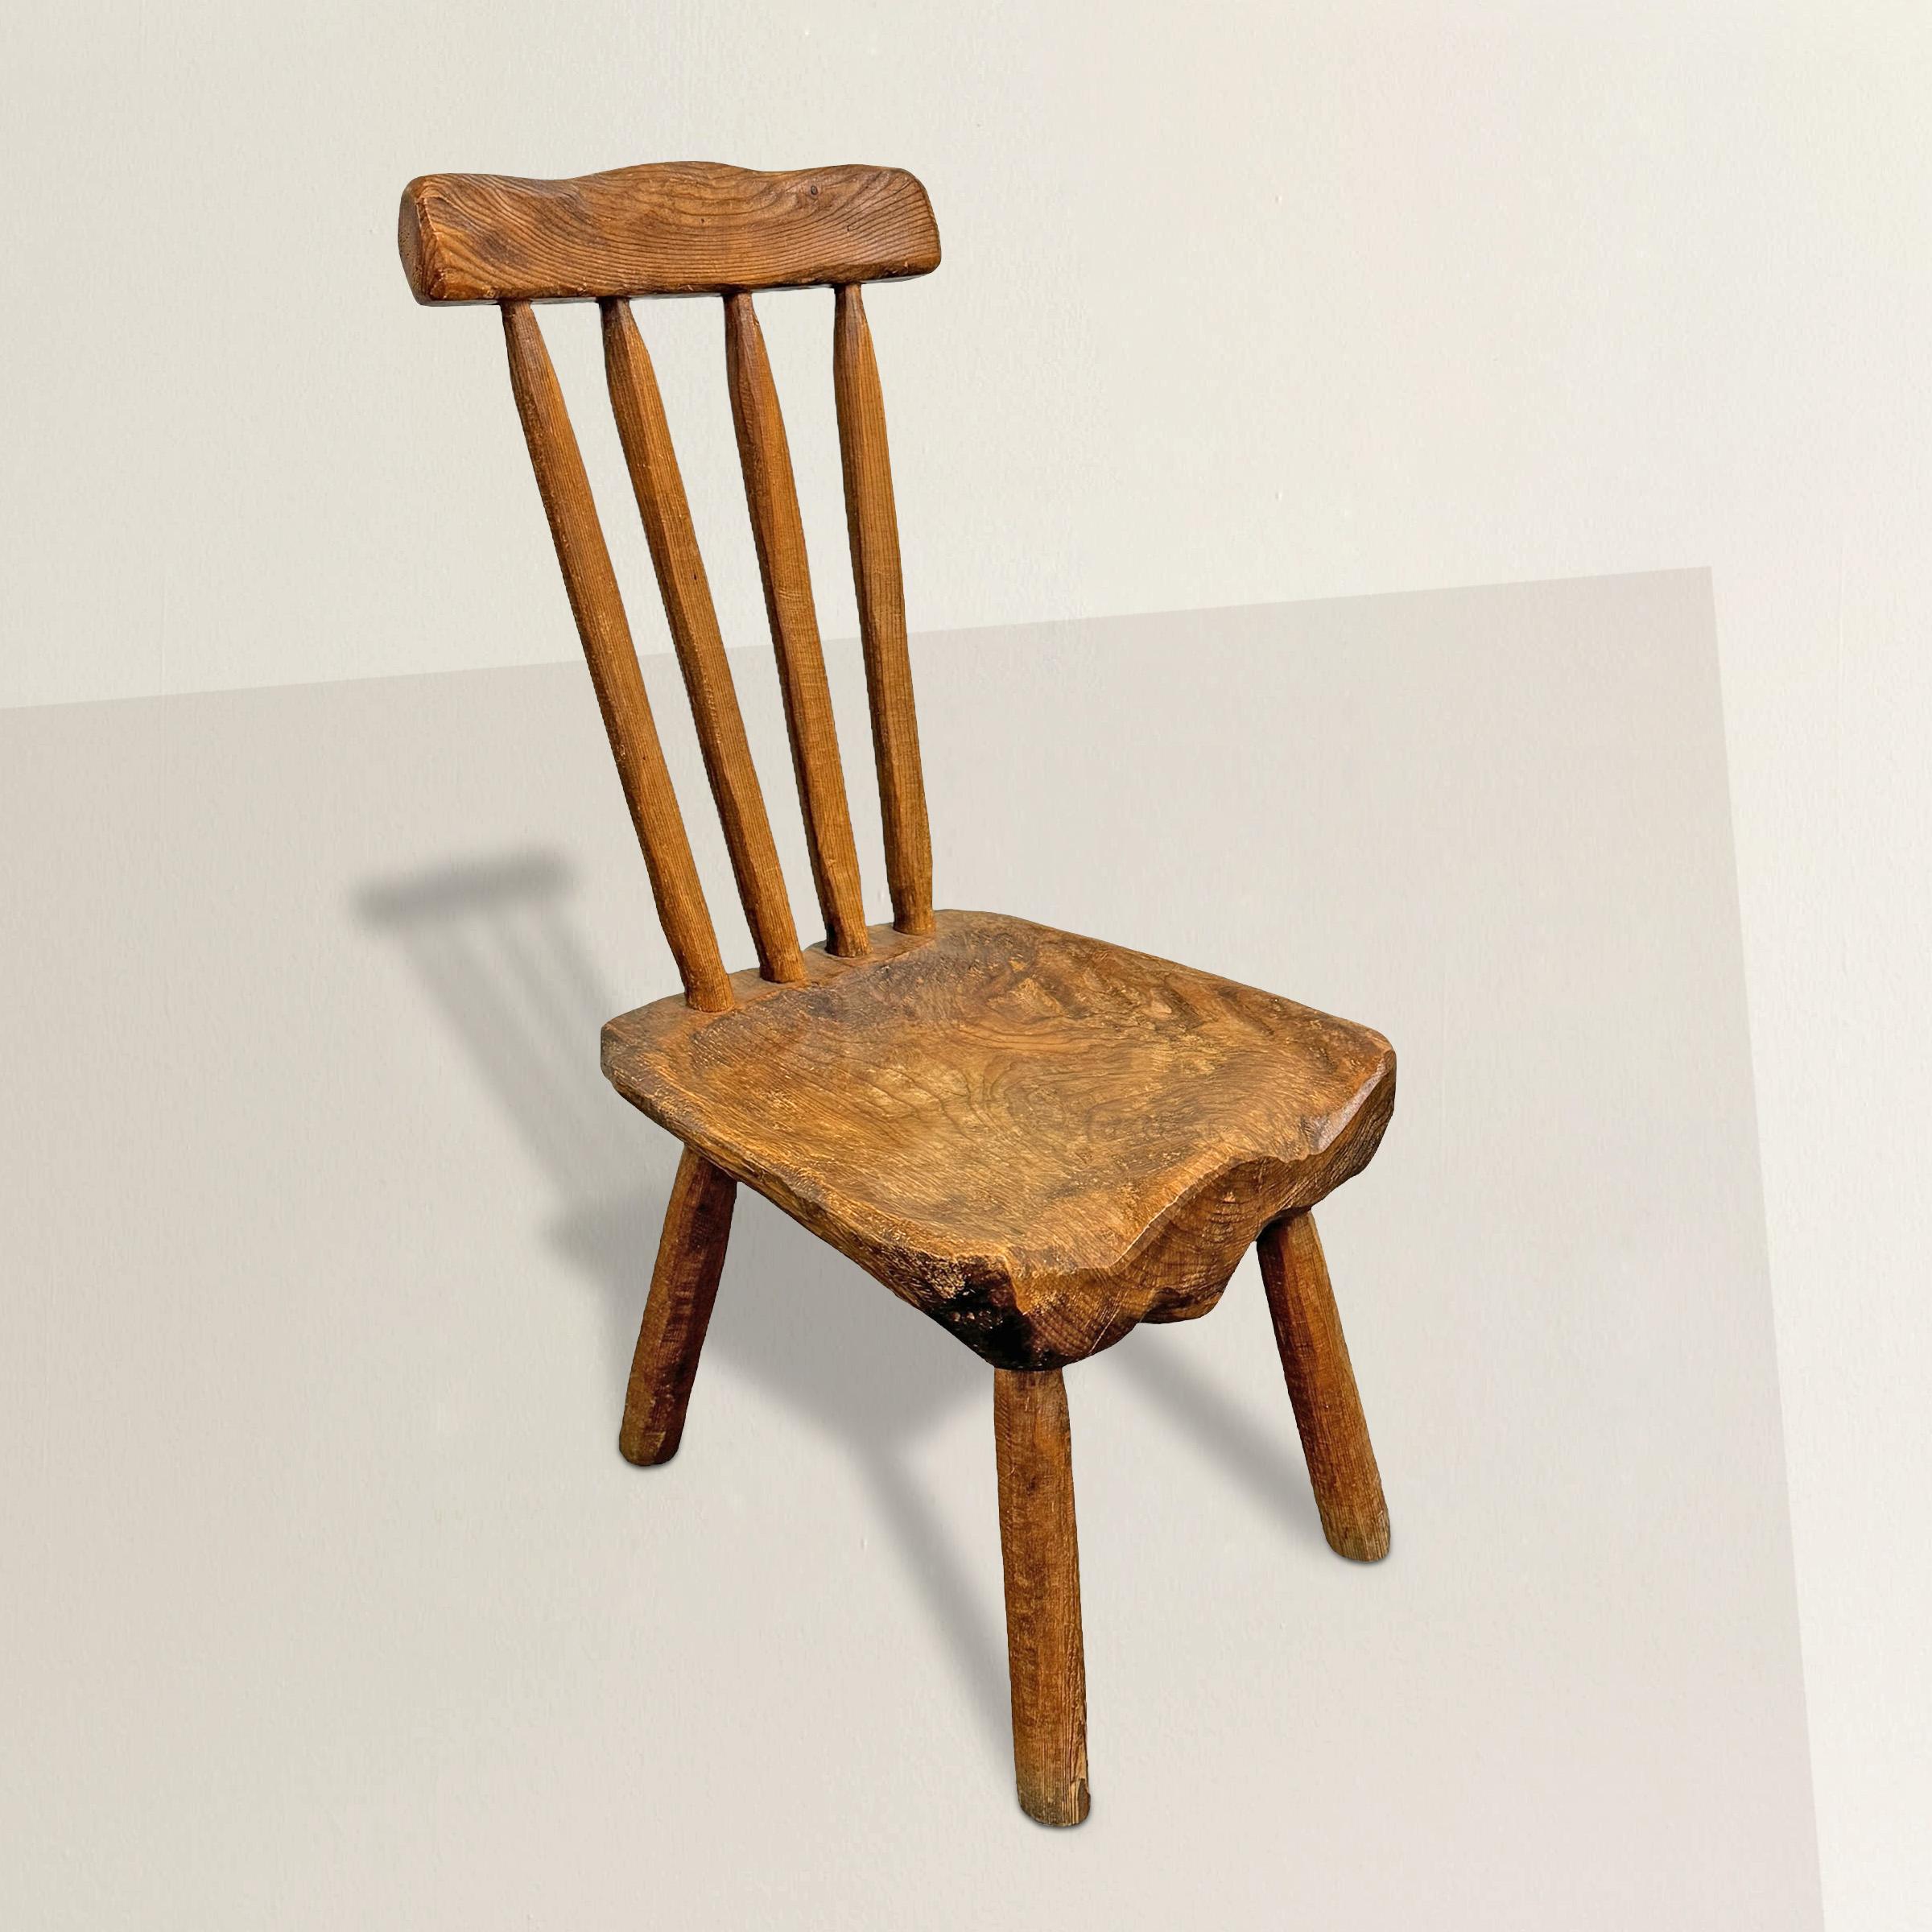 This early 20th-century French Folk Art side chair, hand-carved from pine, embodies a modernist spirit with its playful silhouette and chunky saddle seat. What truly sets it apart is its remarkable patina, a testament to years of loving